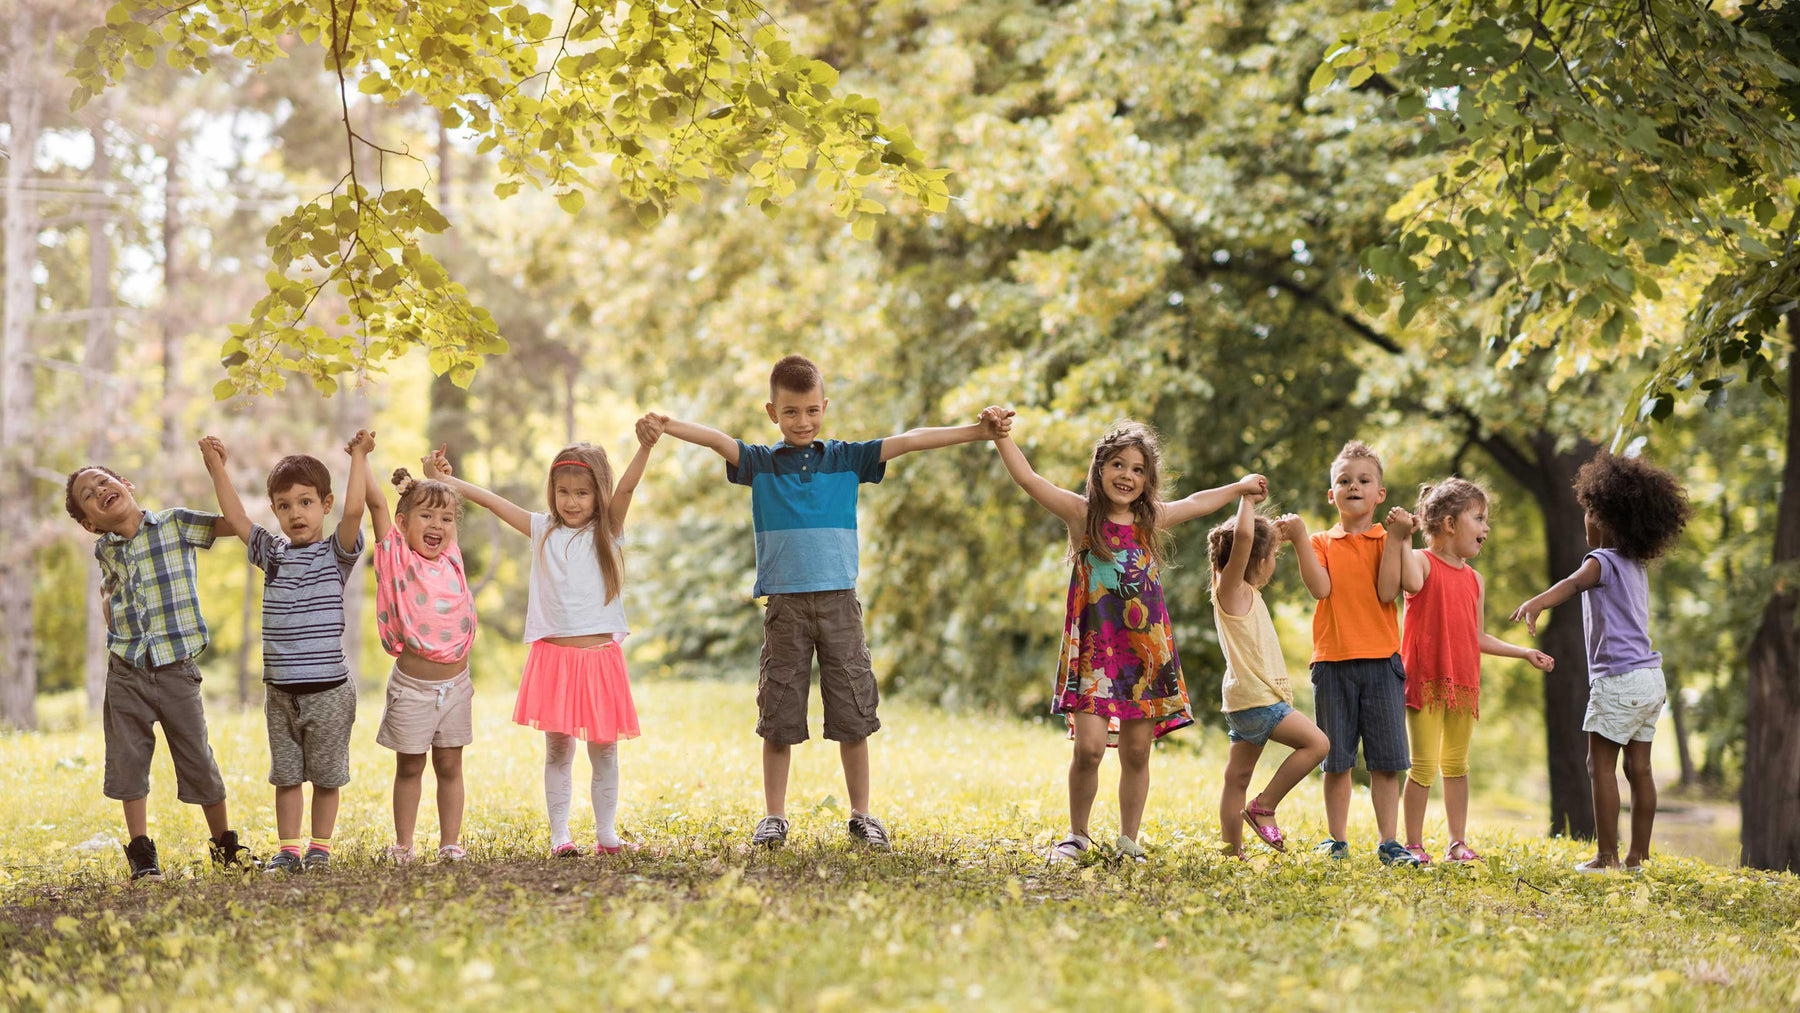 A group of children standing outside in a park in the sunshine holding hands and laughing